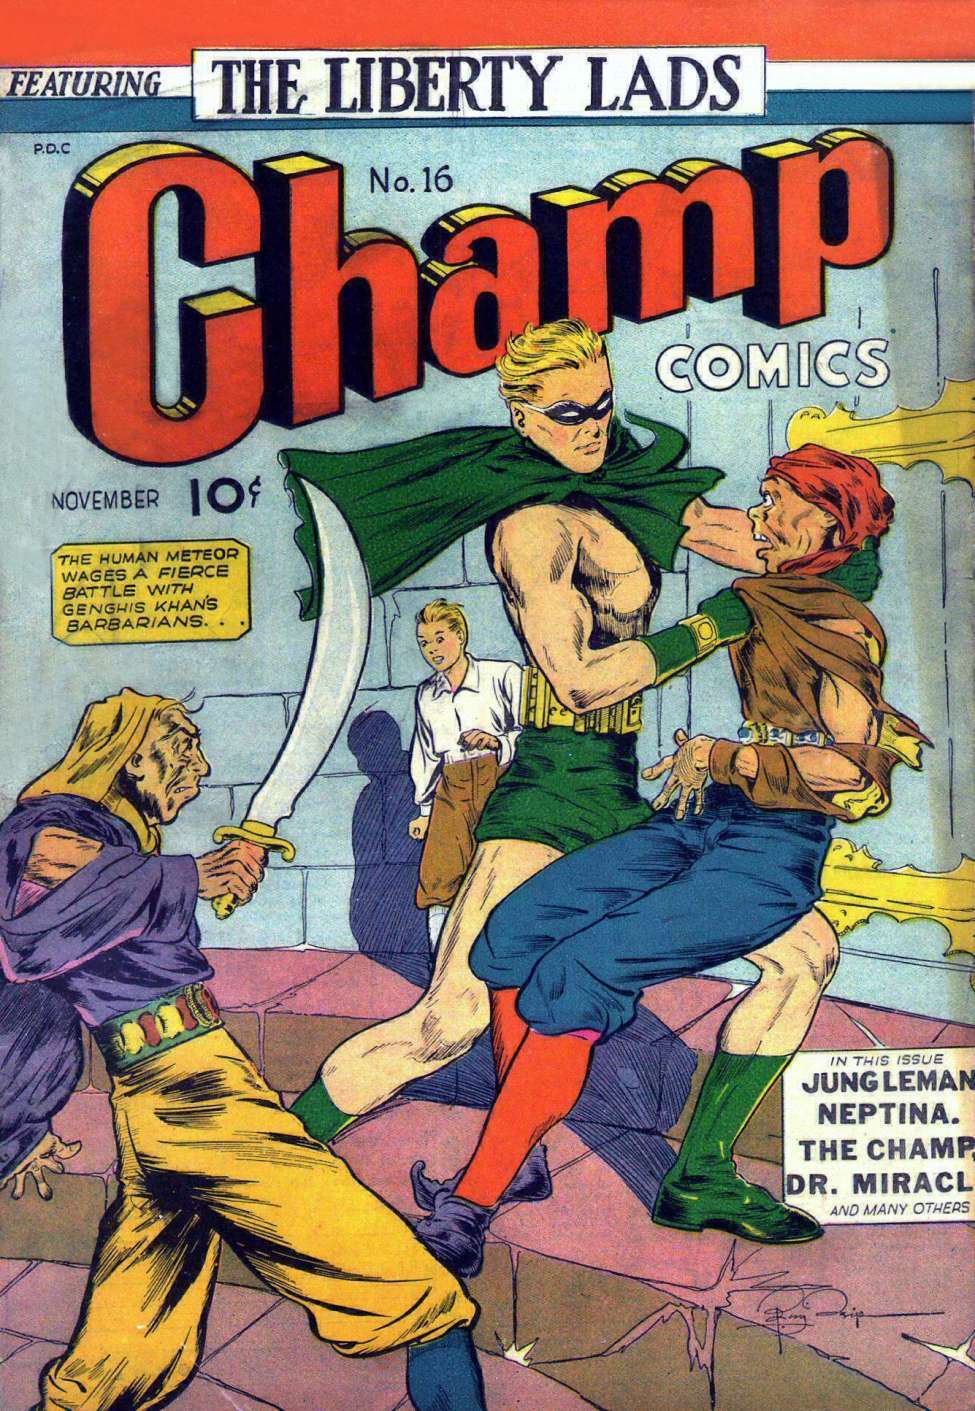 Book Cover For Champ Comics 16 - Version 1